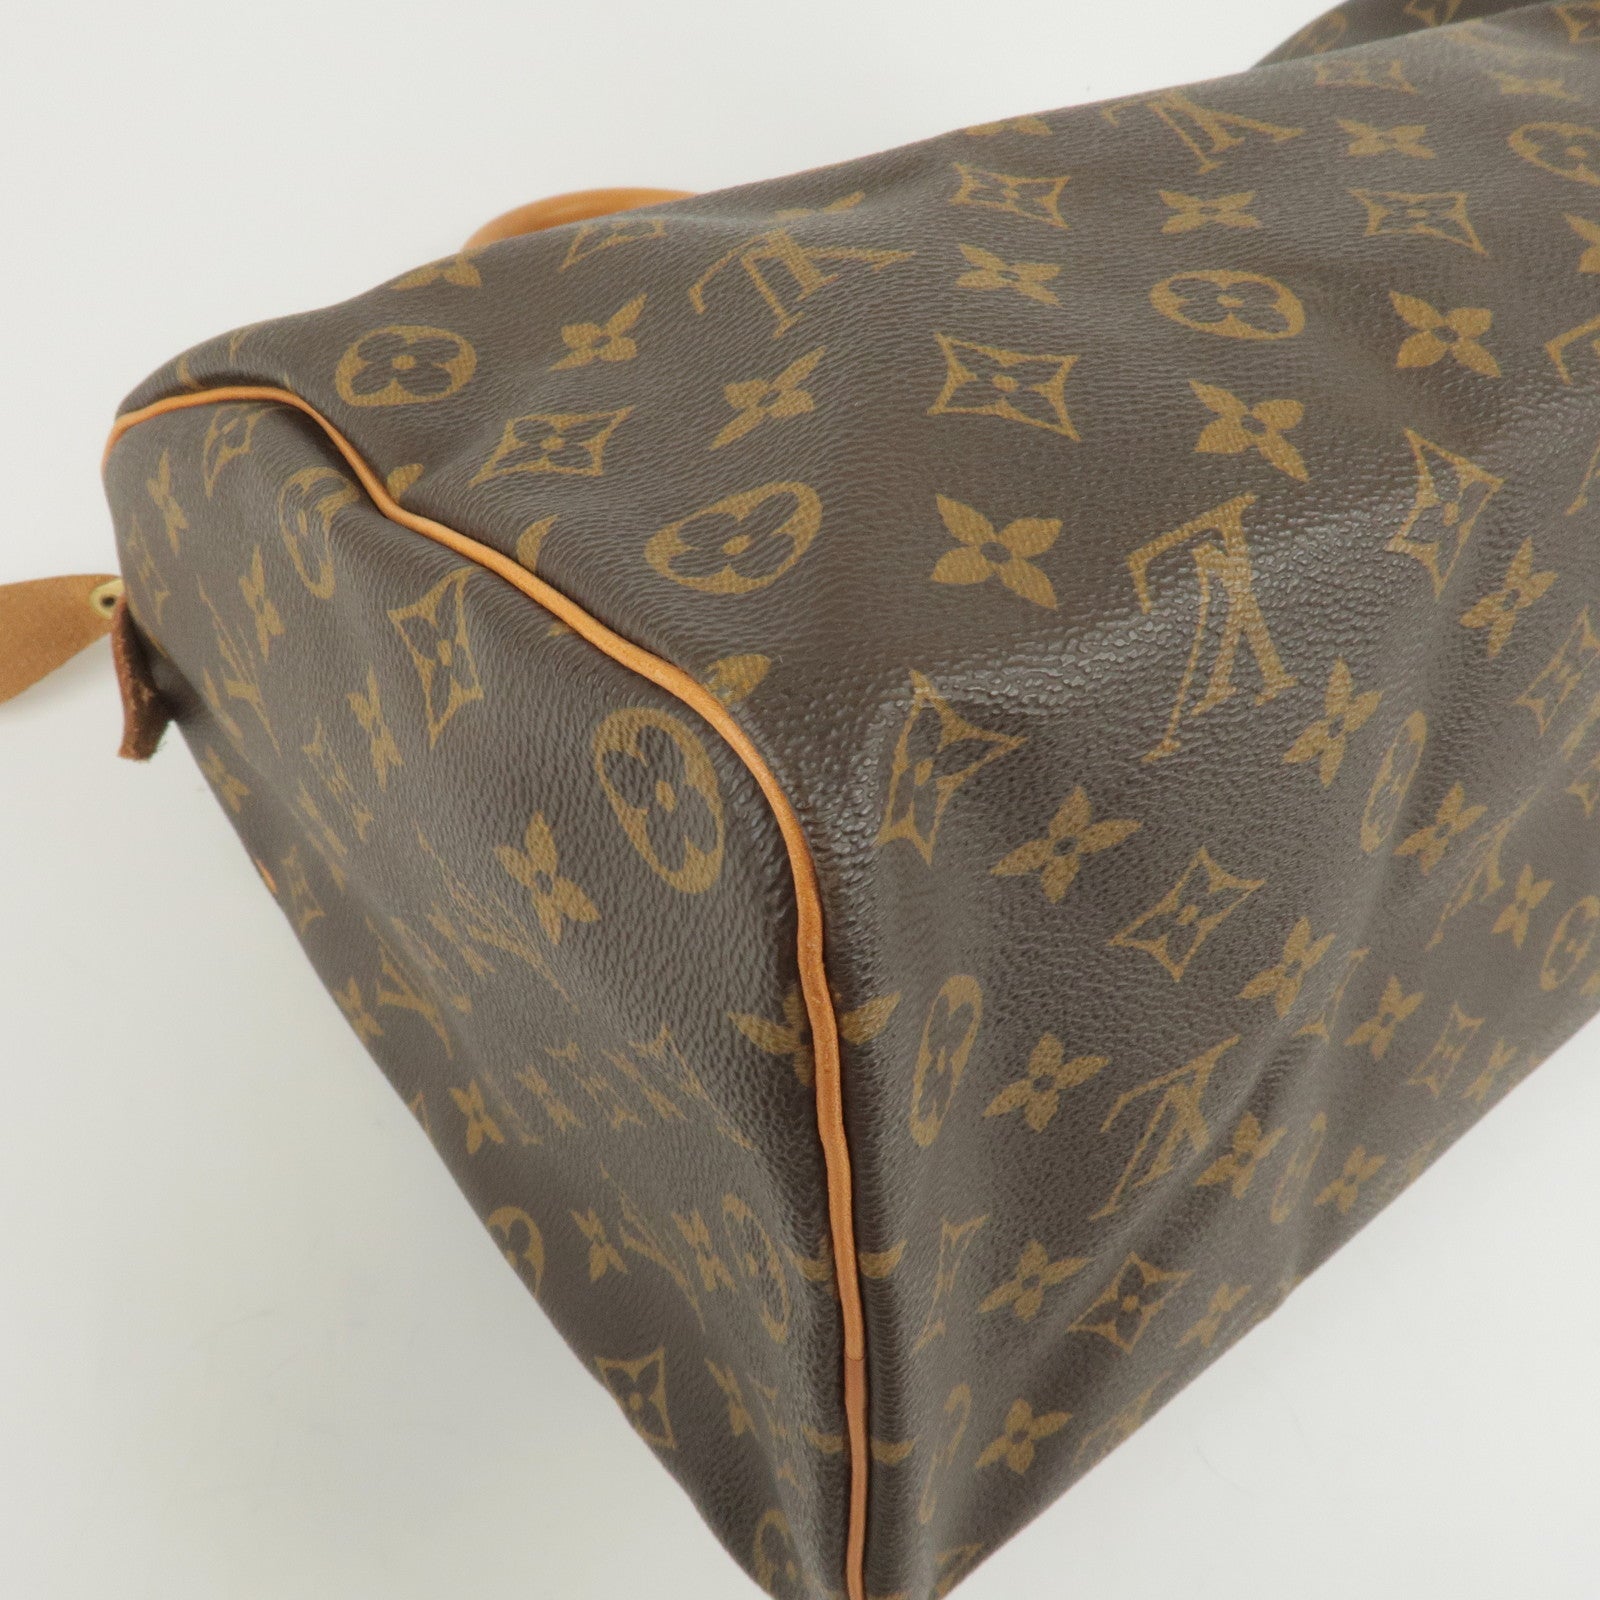 Louis Vuitton 2012 pre-owned Speedy Bandouliere 35 tote bag